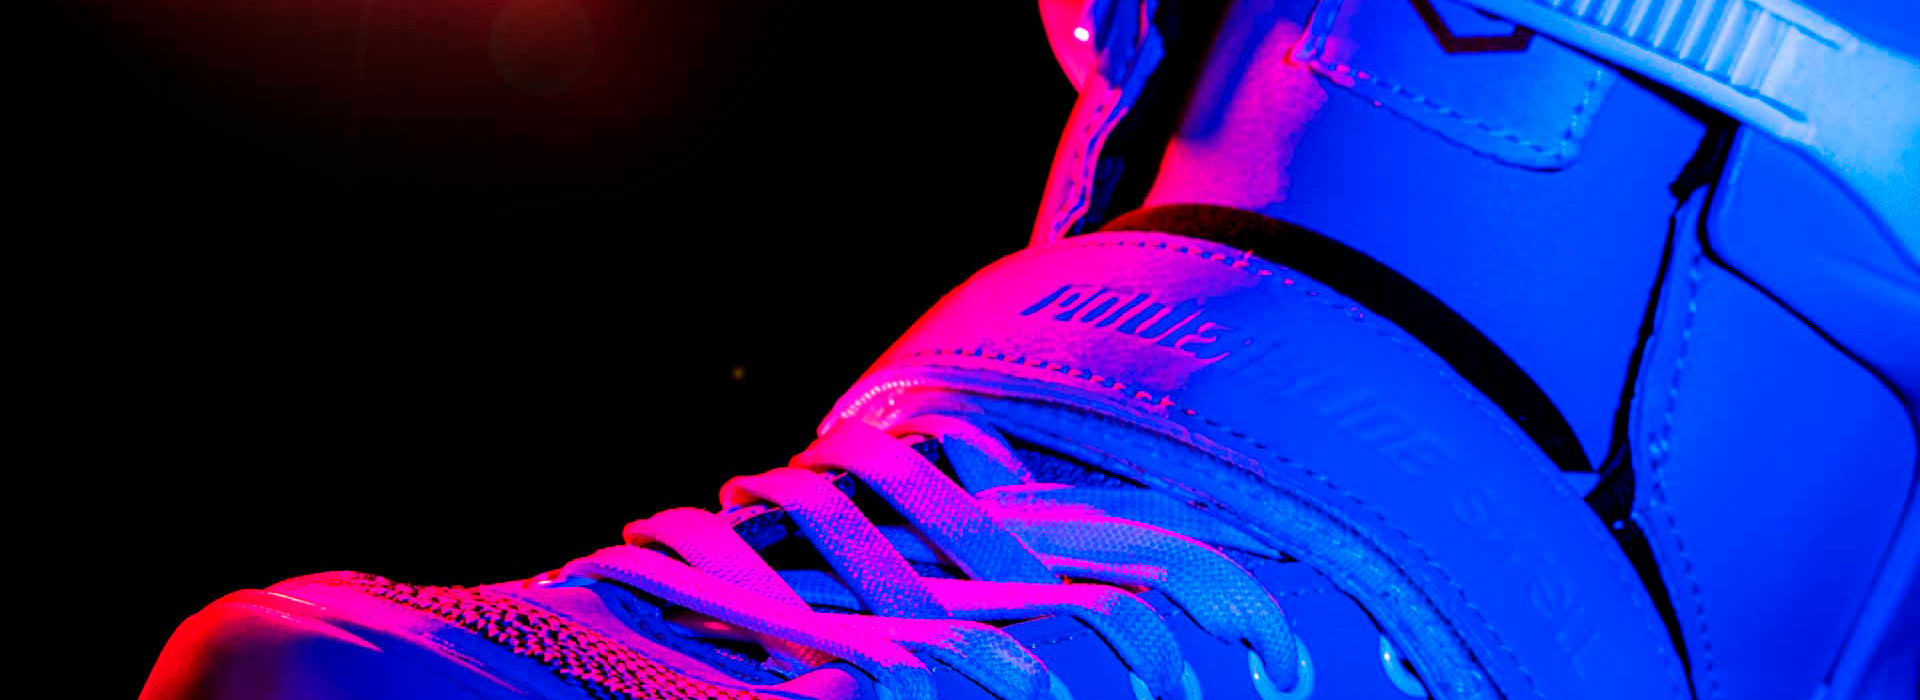 A close-up image of the upper portion of the Powerslide Swell inline skate with artistic pink lighting